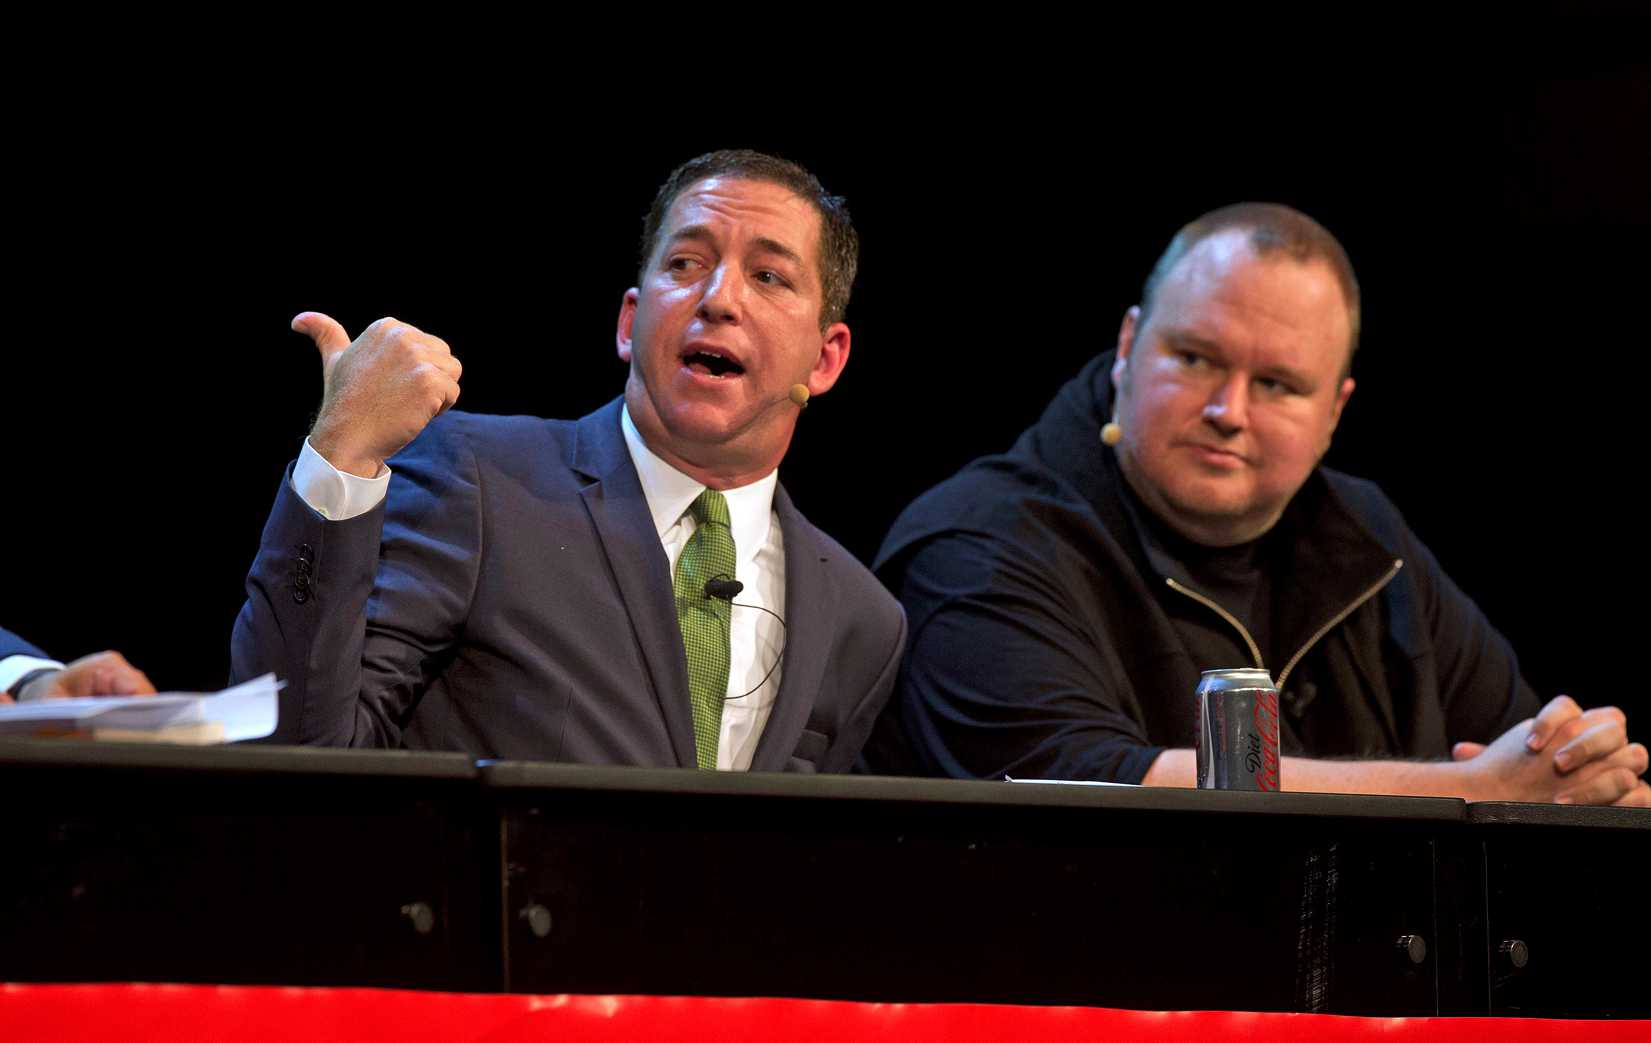 Journalist and author Glenn Greenwald, left, and Kim Dotcom attend a political forum at in Auckland on Sept. 15, 2014 (Brett Phibbs—New Zealand Herald/AP)